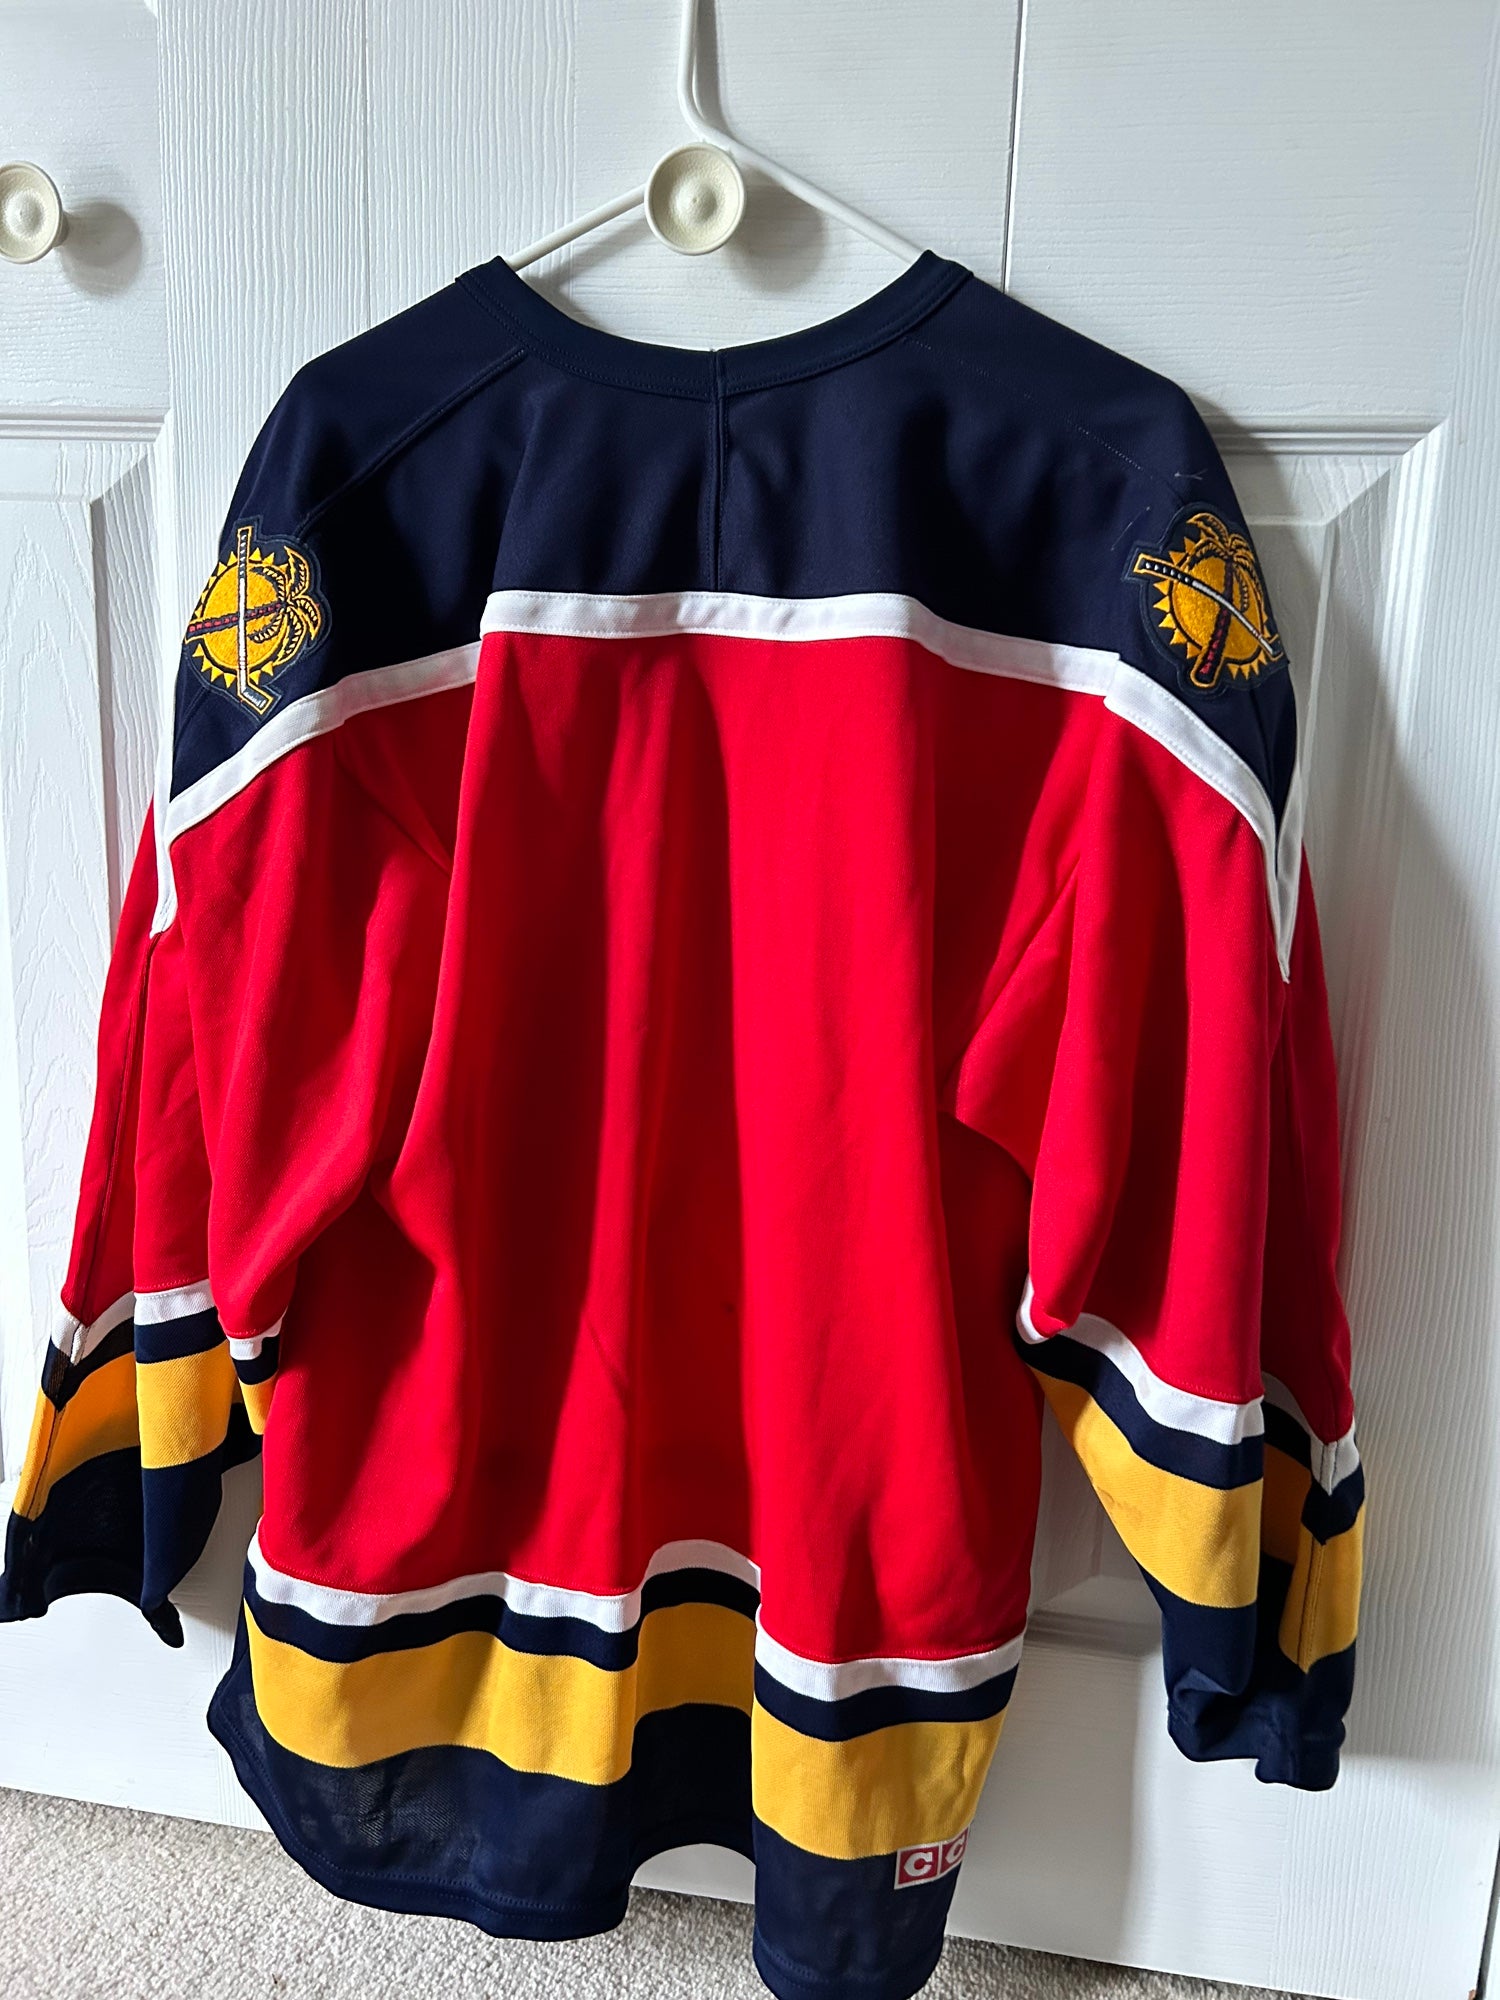 Vintage Pavel Bure Florida Panthers sublimated jersey.